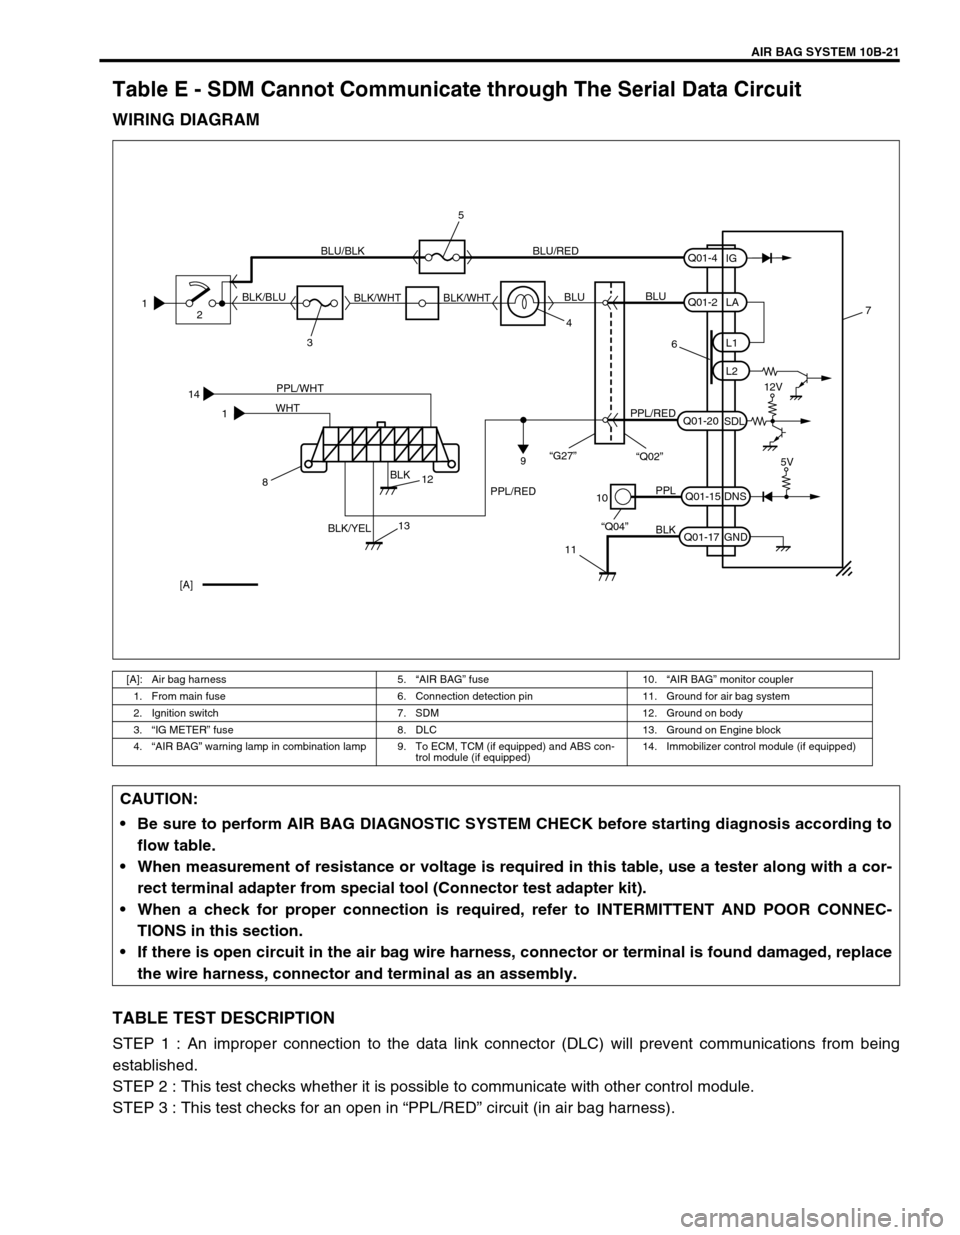 SUZUKI GRAND VITARA 1999 2.G Service Manual AIR BAG SYSTEM 10B-21
Table E - SDM Cannot Communicate through The Serial Data Circuit
WIRING DIAGRAM
TABLE TEST DESCRIPTION
STEP 1 : An improper connection to the data link connector (DLC) will preve